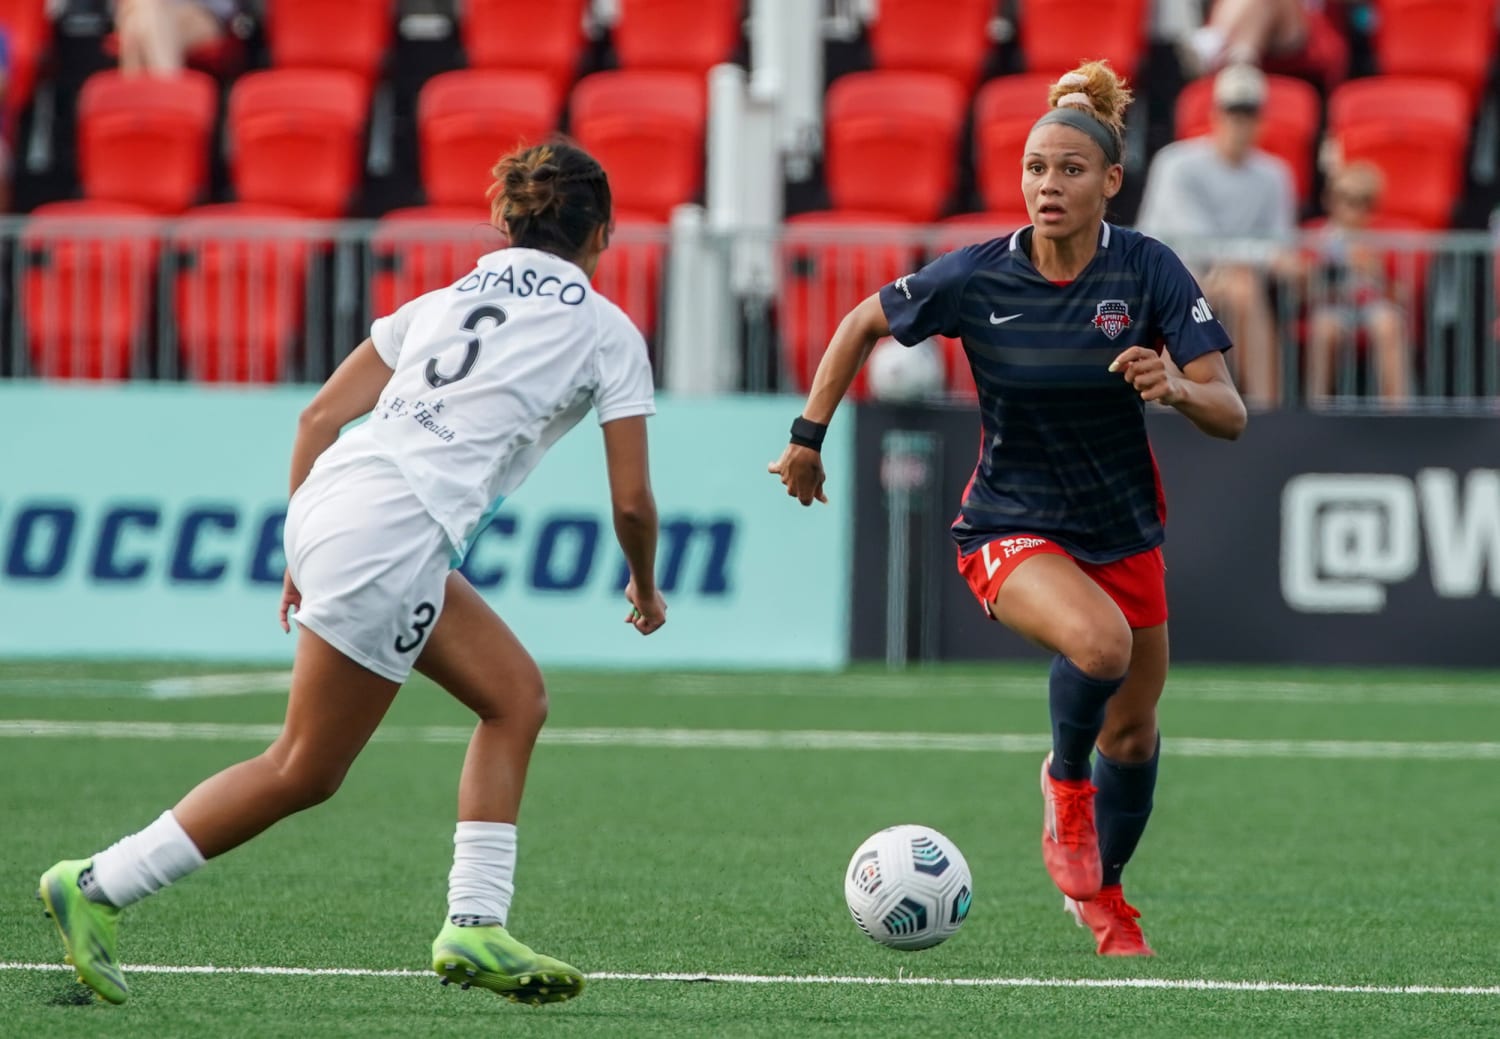 Trinity Rodman: 'My mom wasn't in the NBA but she's my role model', NWSL